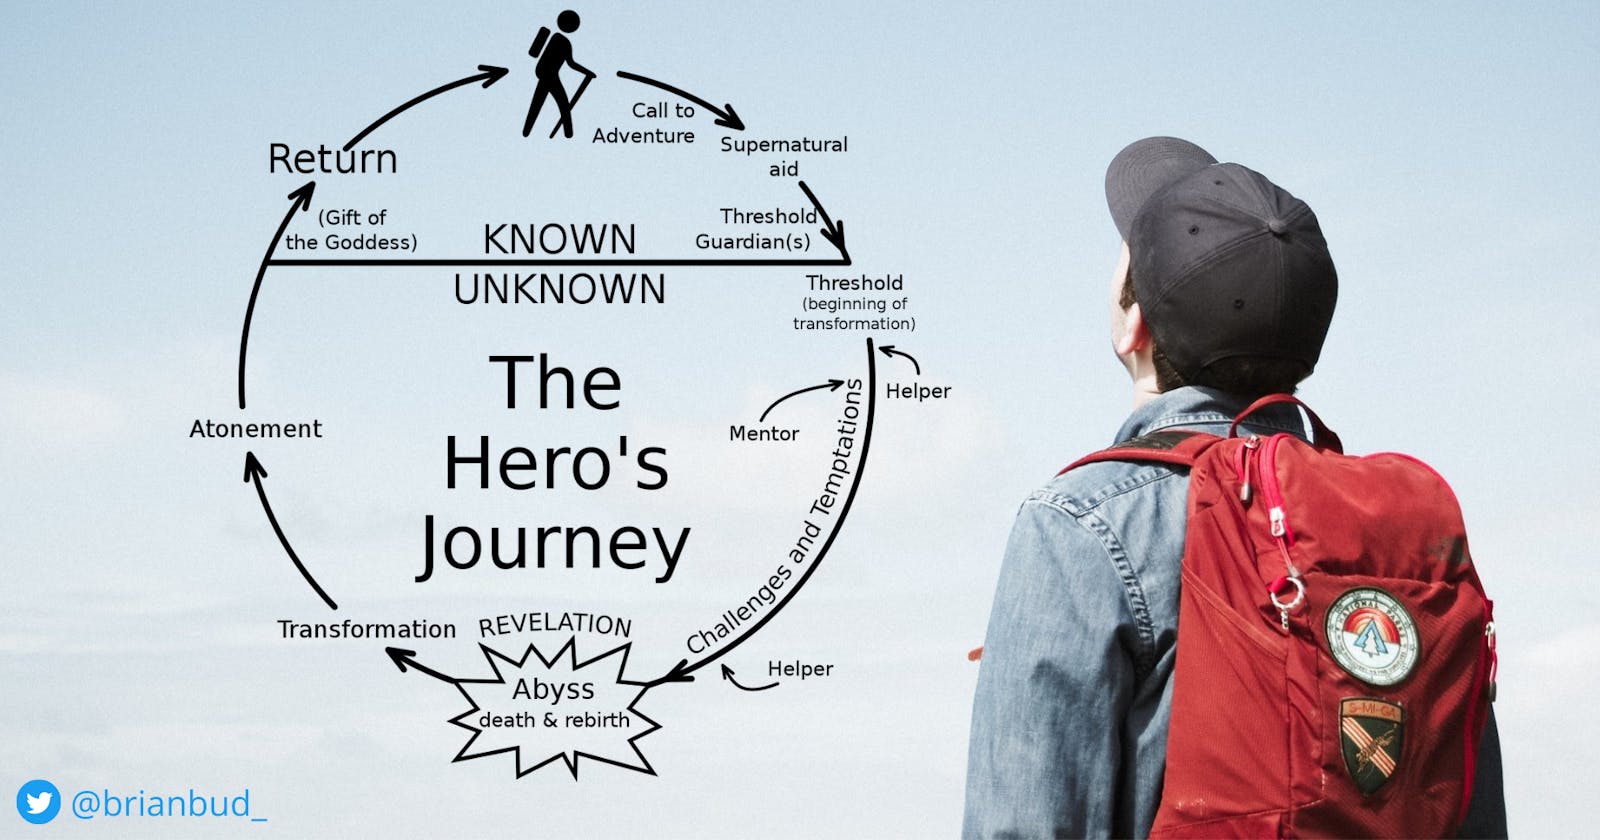 How documenting your journey will make you a HERO.